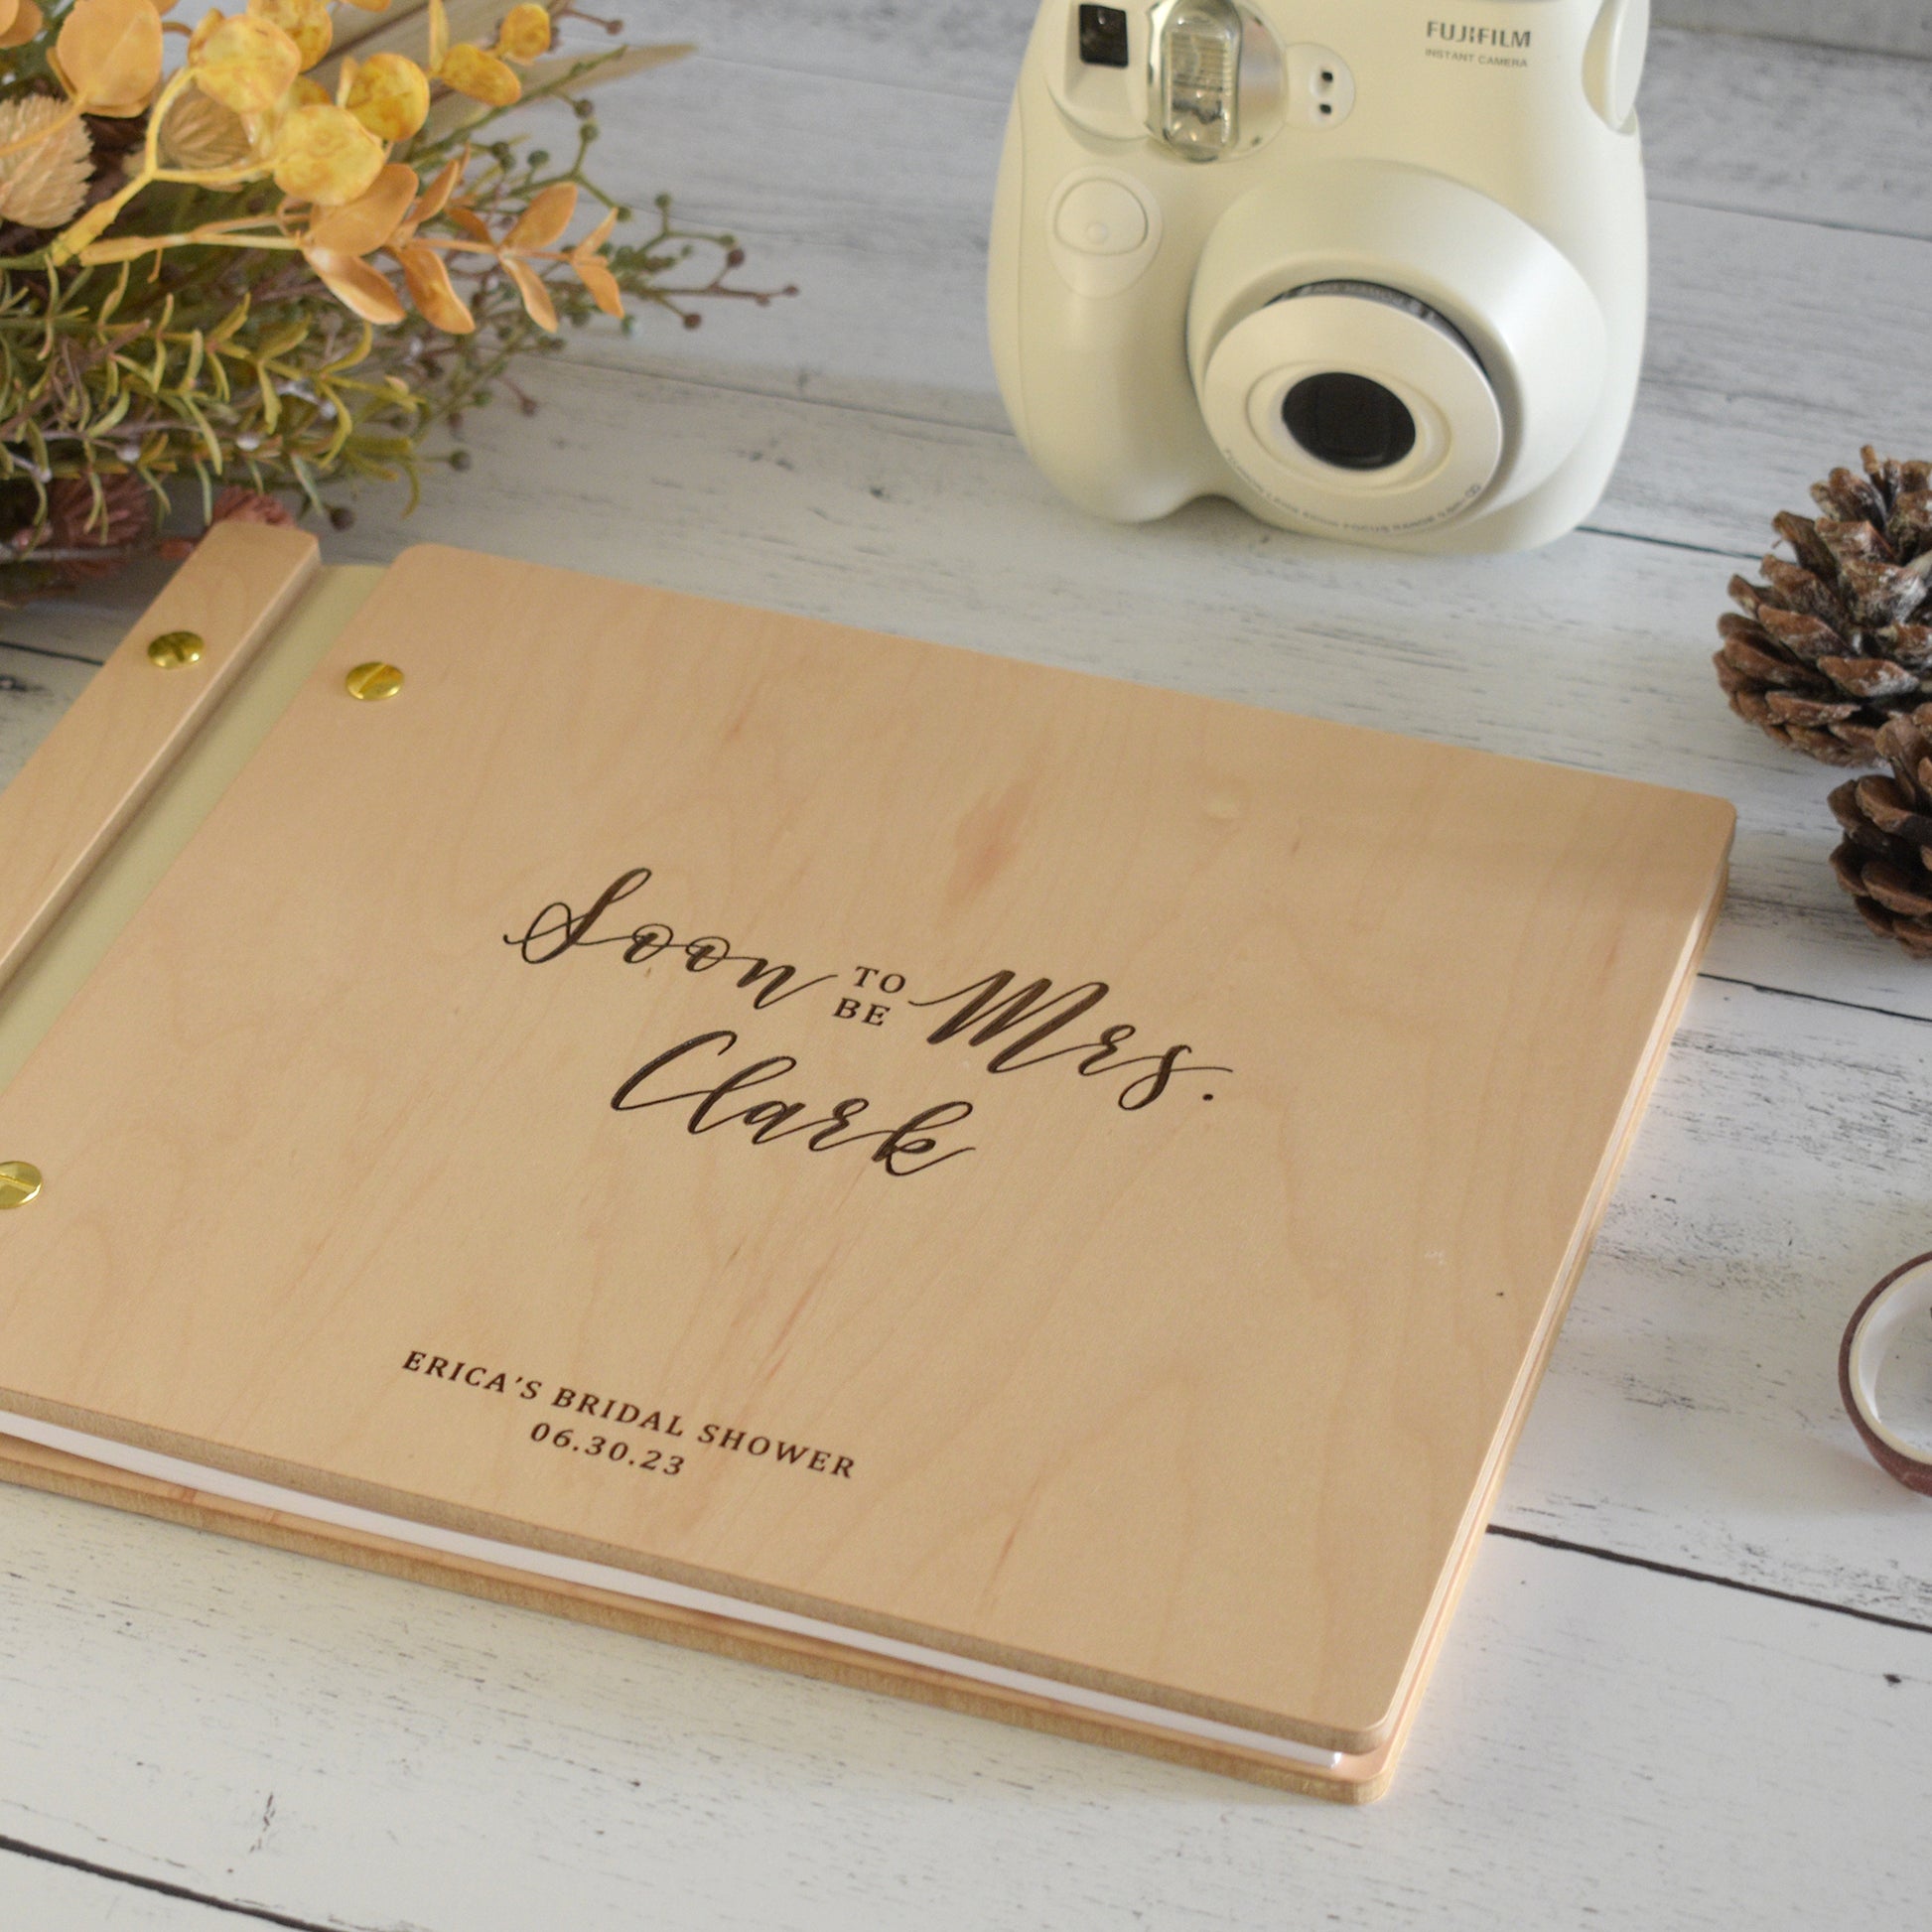 An 8.5x11" wedding guest book lies on a table. Made of cherry or maple wood, vegan leather binding, and aluminum hardware. The front cover includes an engraved design with personalization.